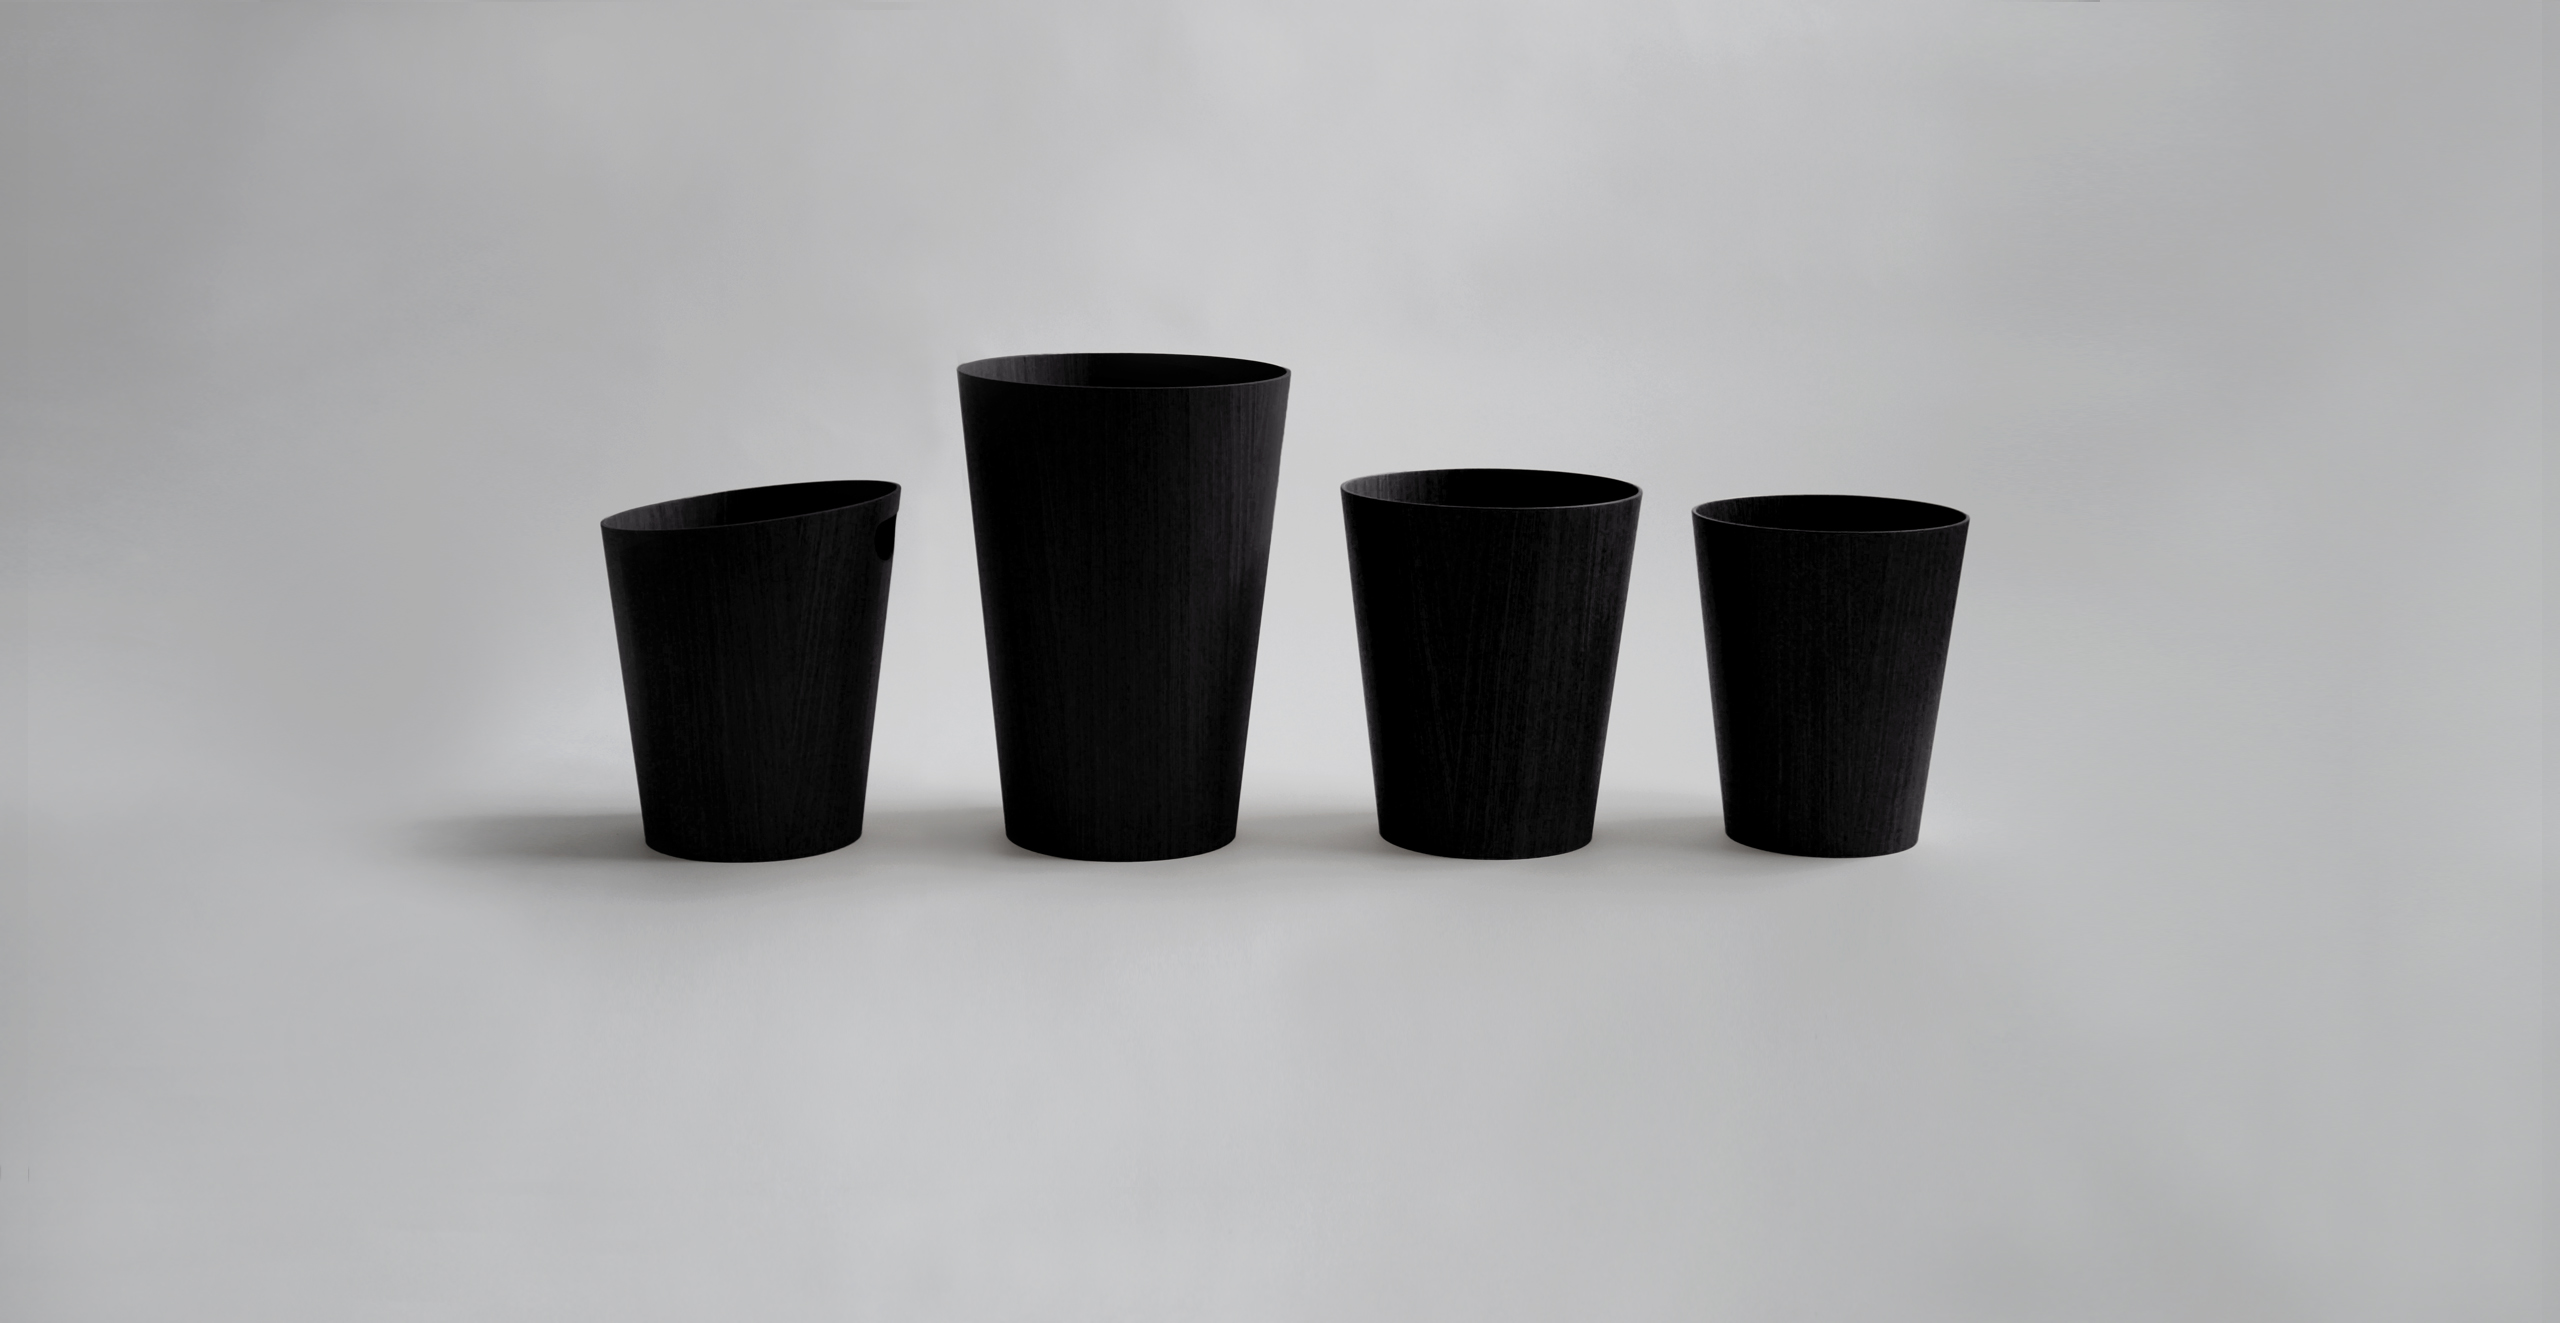 Four Saito Black Ash Wood waste baskets in a row in different styles against a light gray back drop